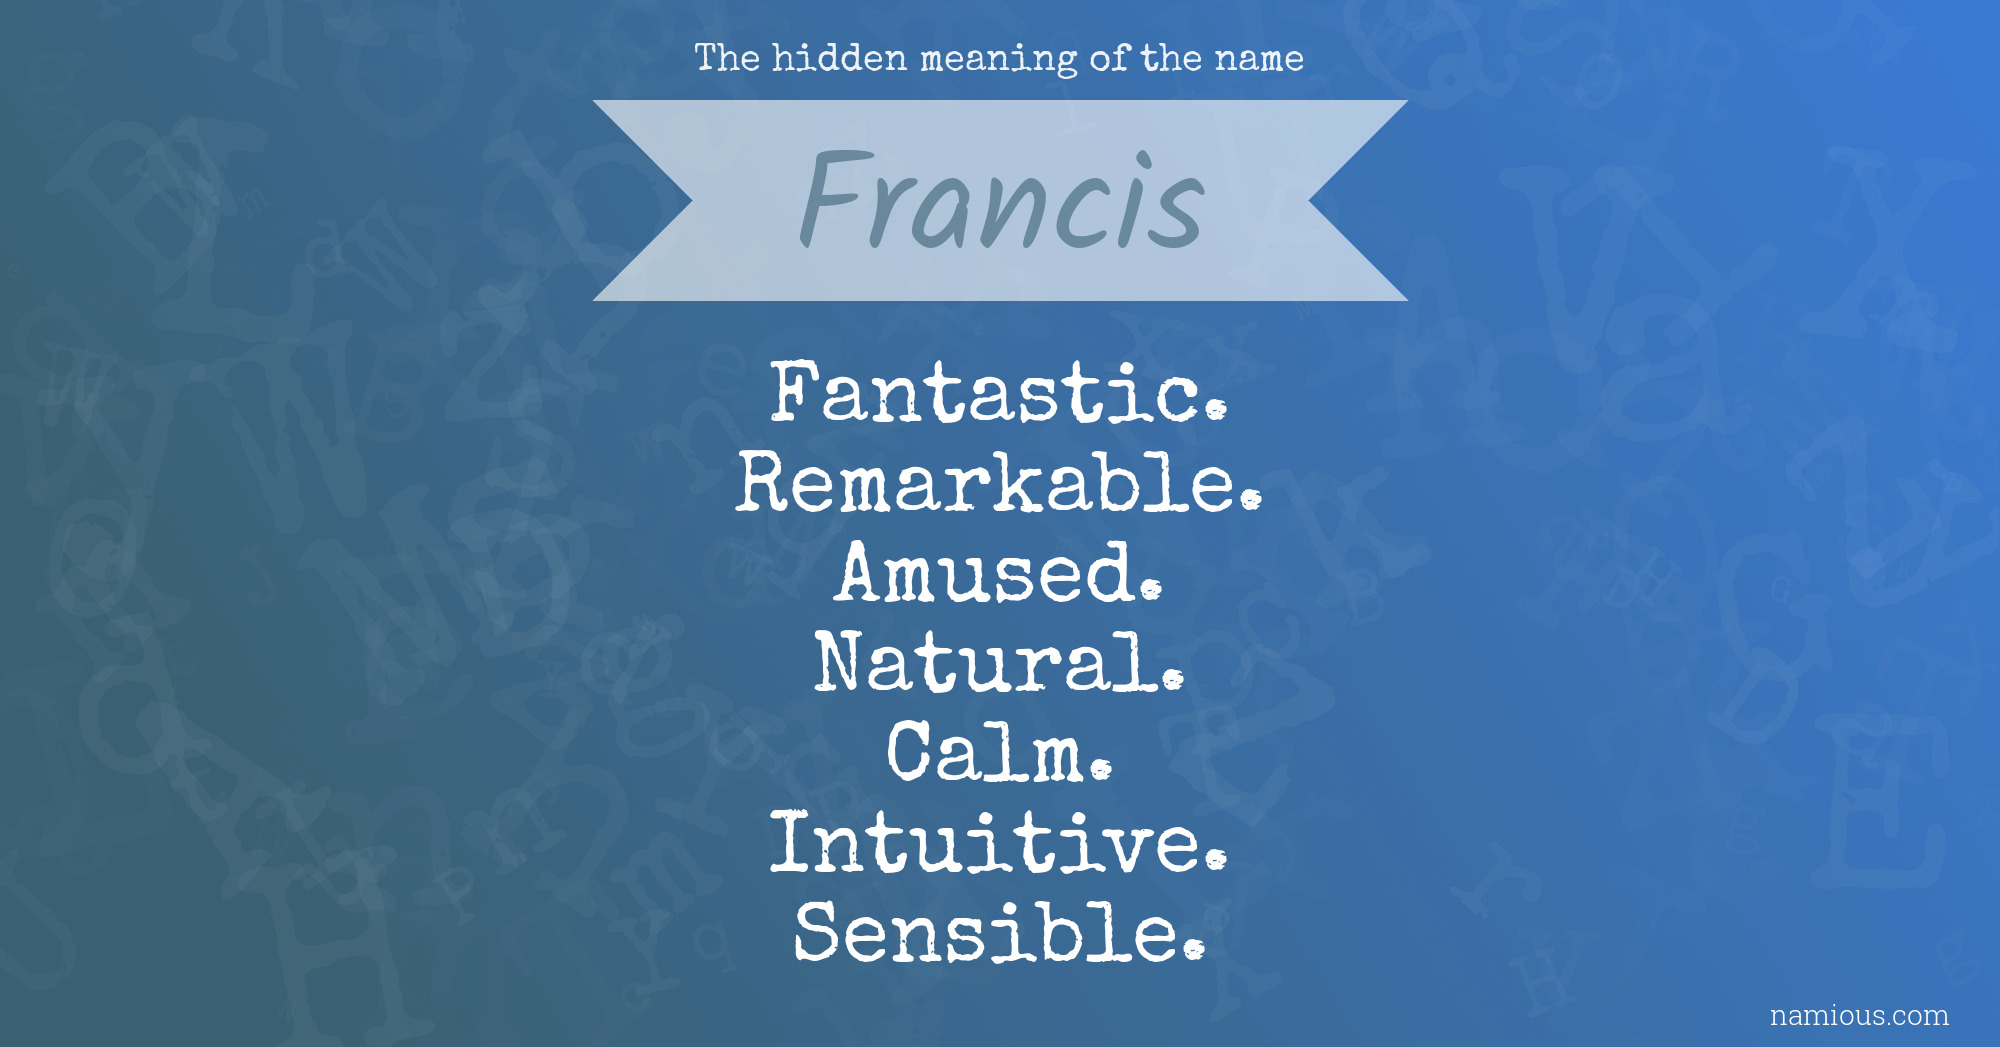 The hidden meaning of the name Francis